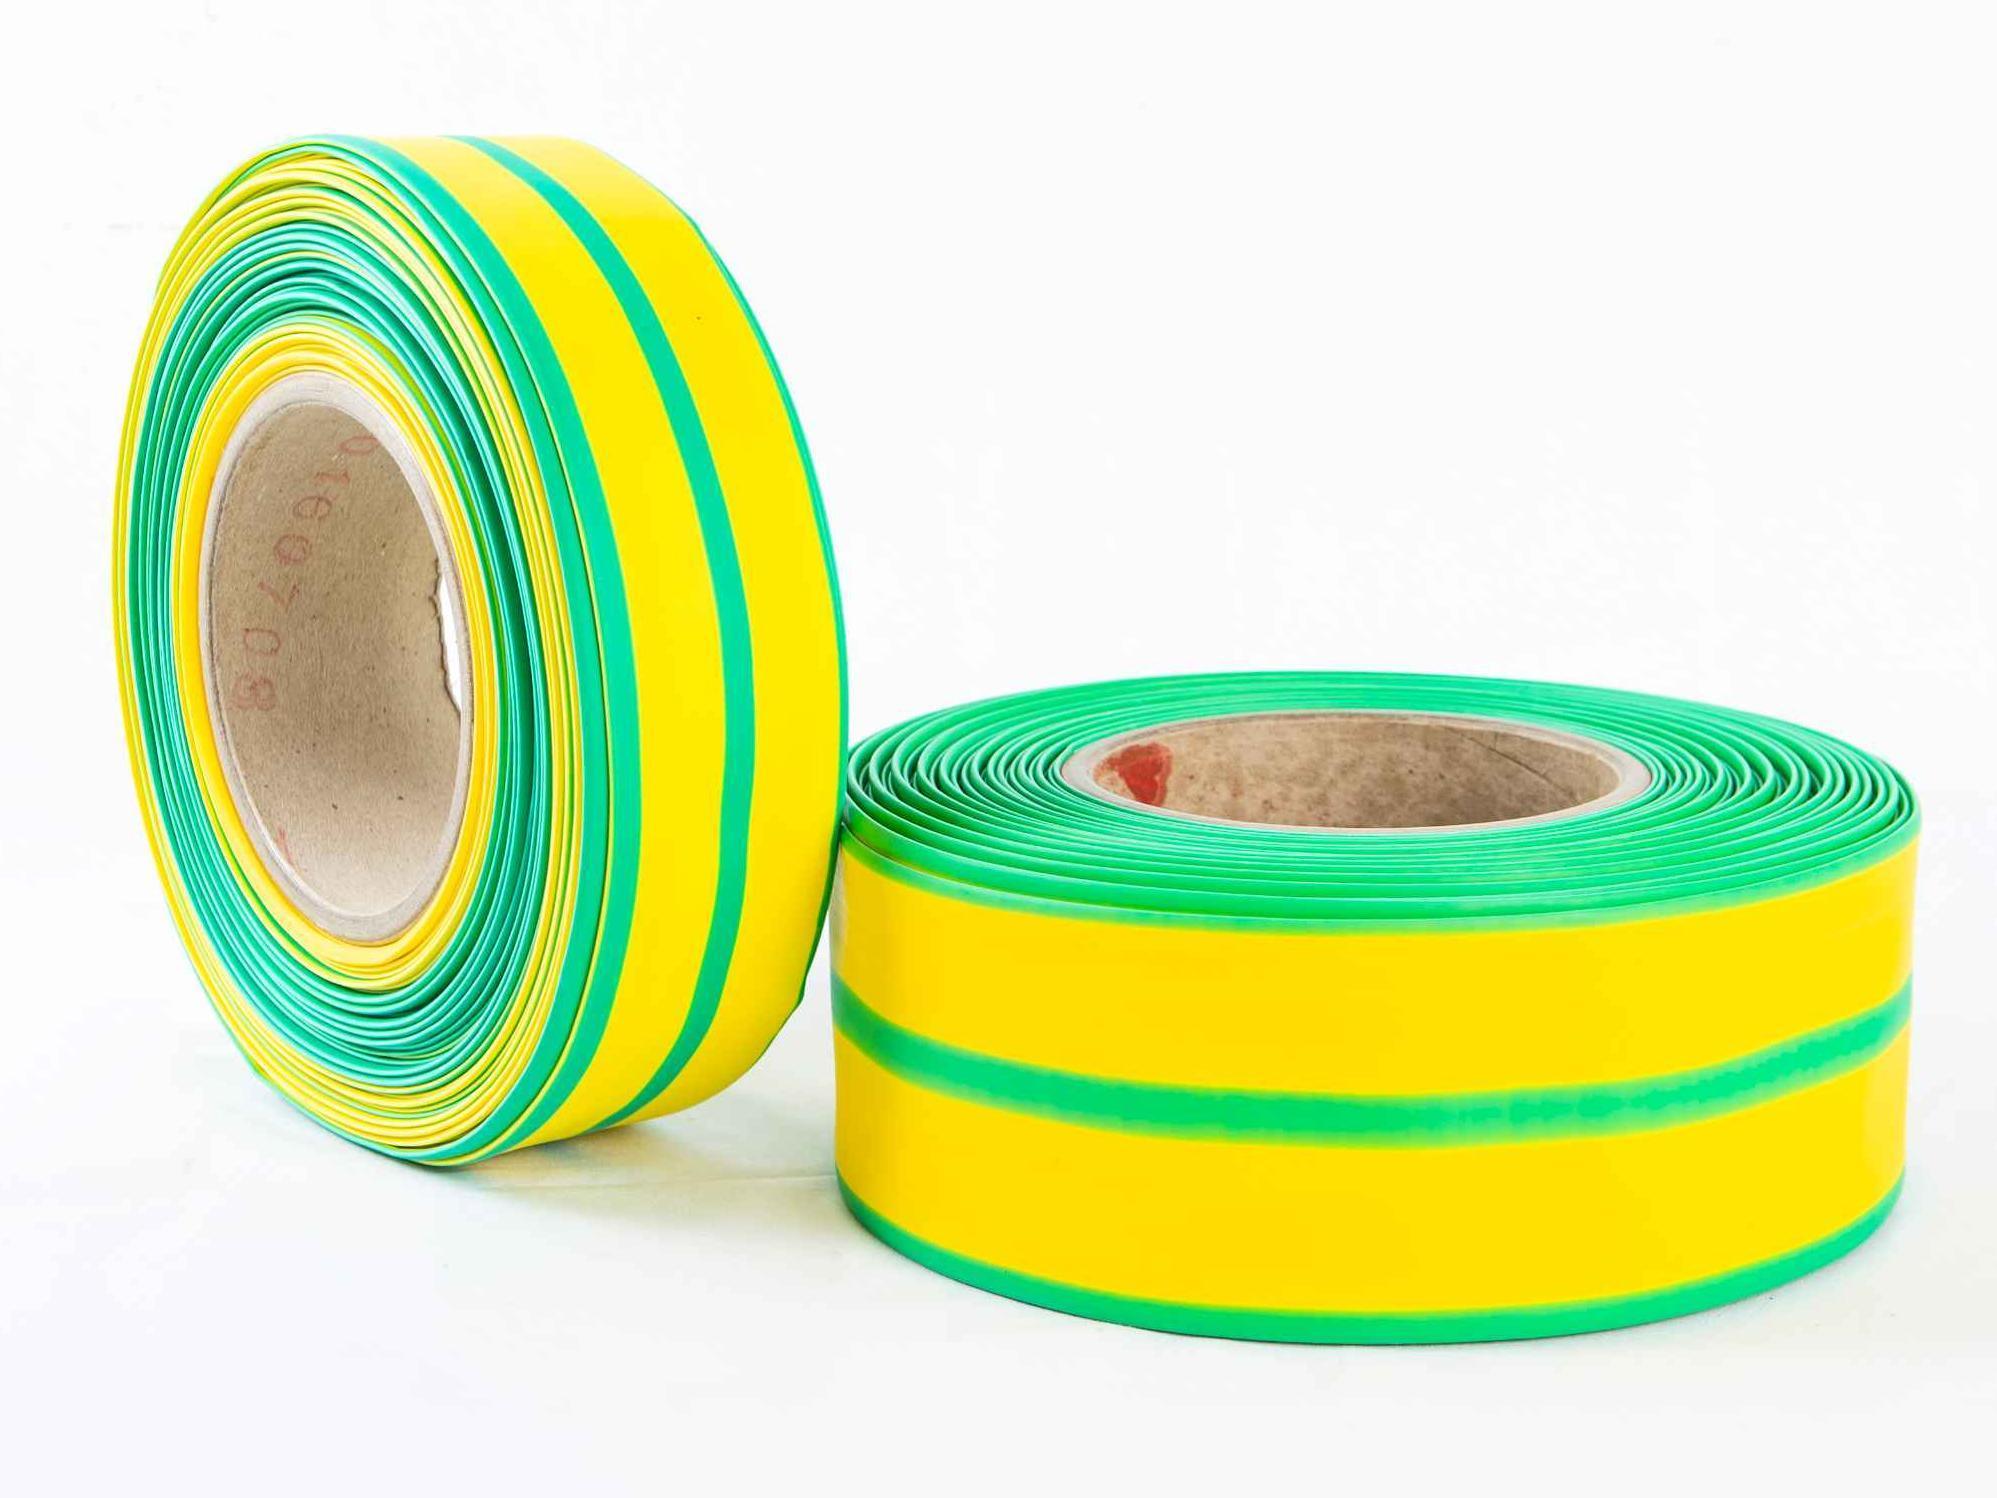 Earth Wire Protection Plastic Tube φ 35 Yellow-Green Heat Shrink Tubing Cable Sleeve